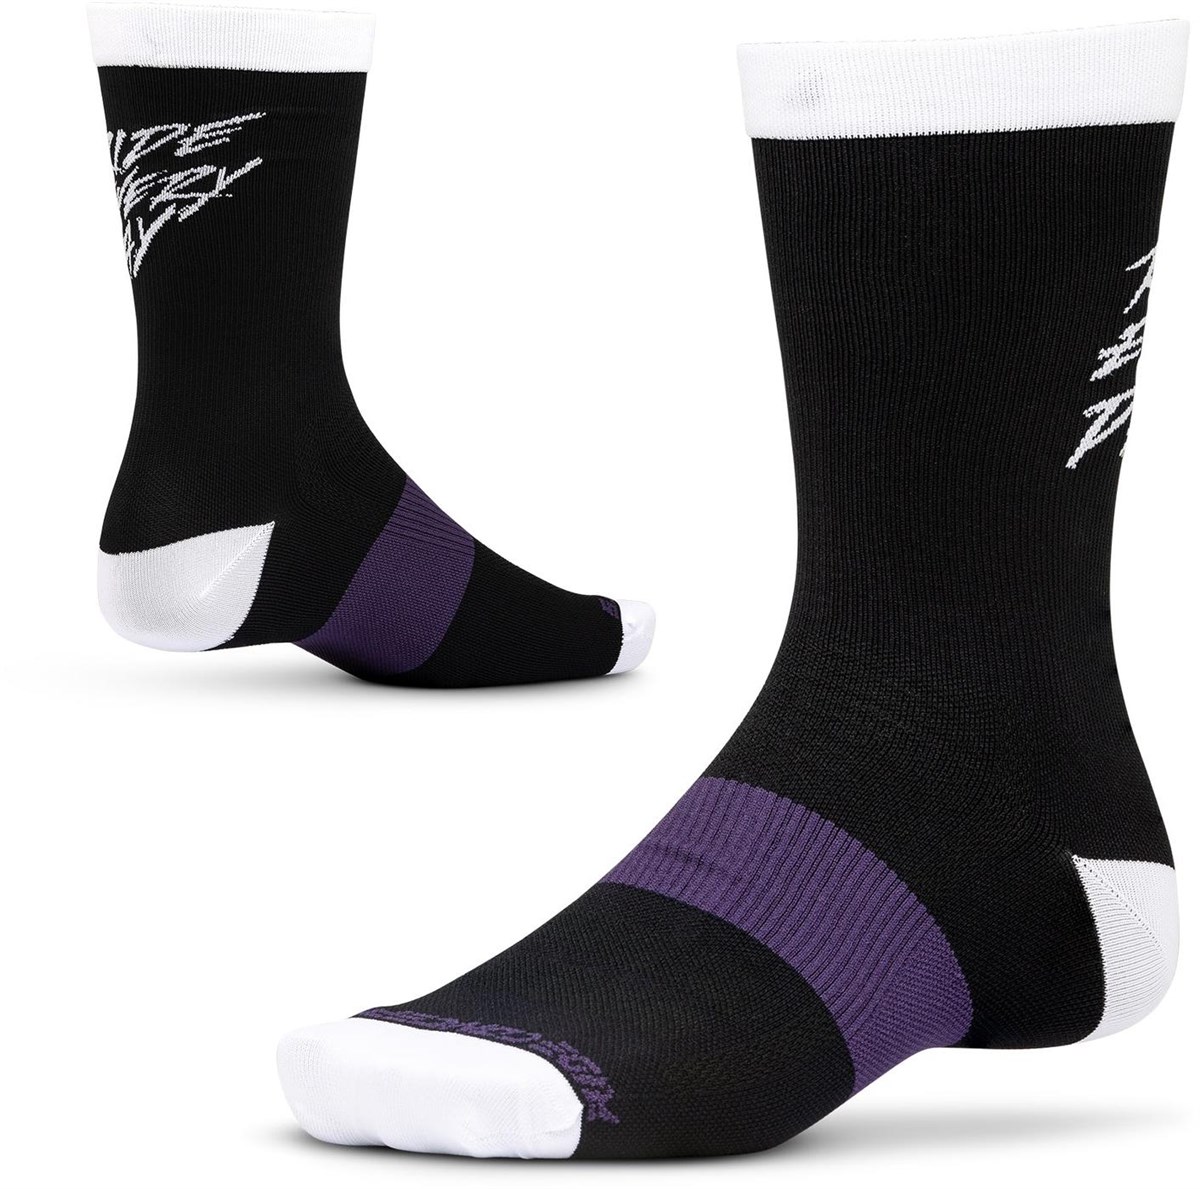 Ride Concepts Ride Every Day Youth Cycling Socks product image